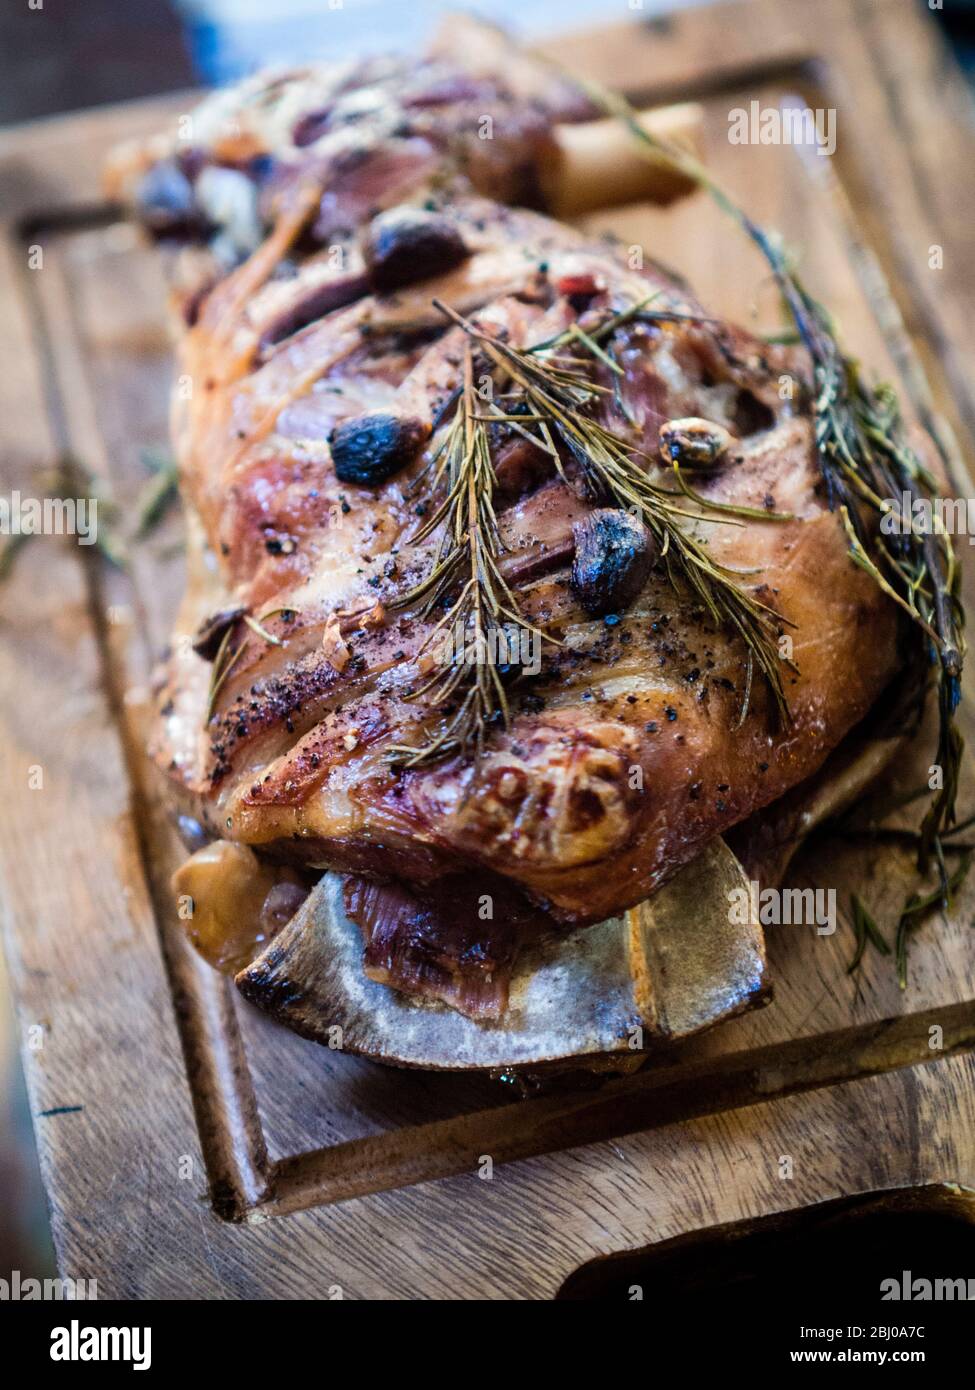 Slow roast shoulder of lamb with garlic and rosemary, on wooden carving board Stock Photo